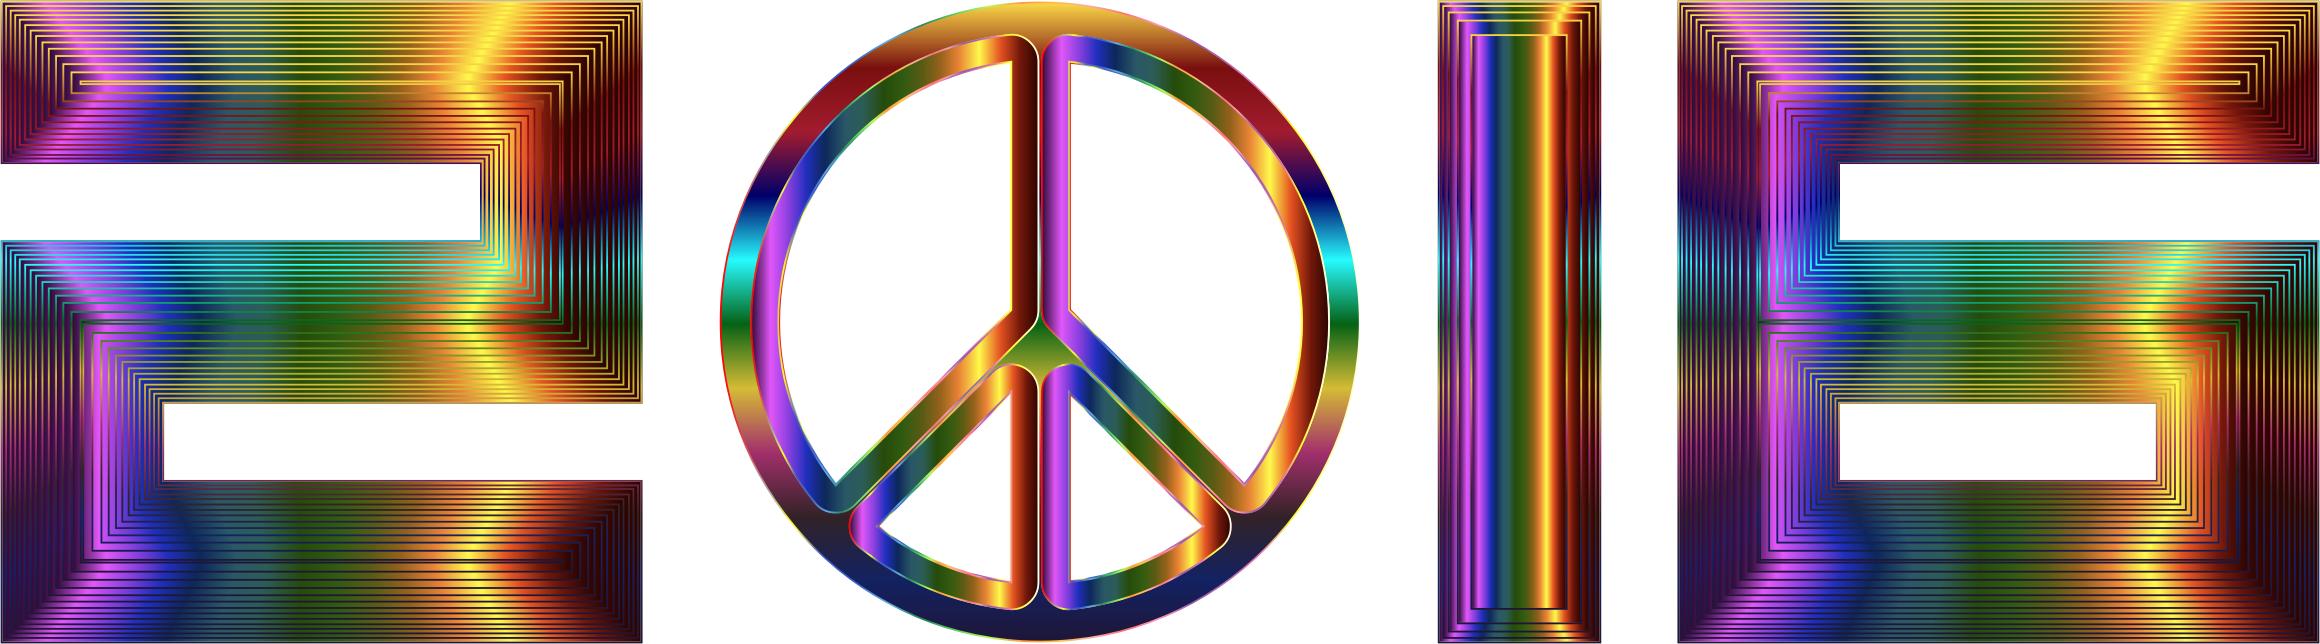 Chromatic 2016 Peace png